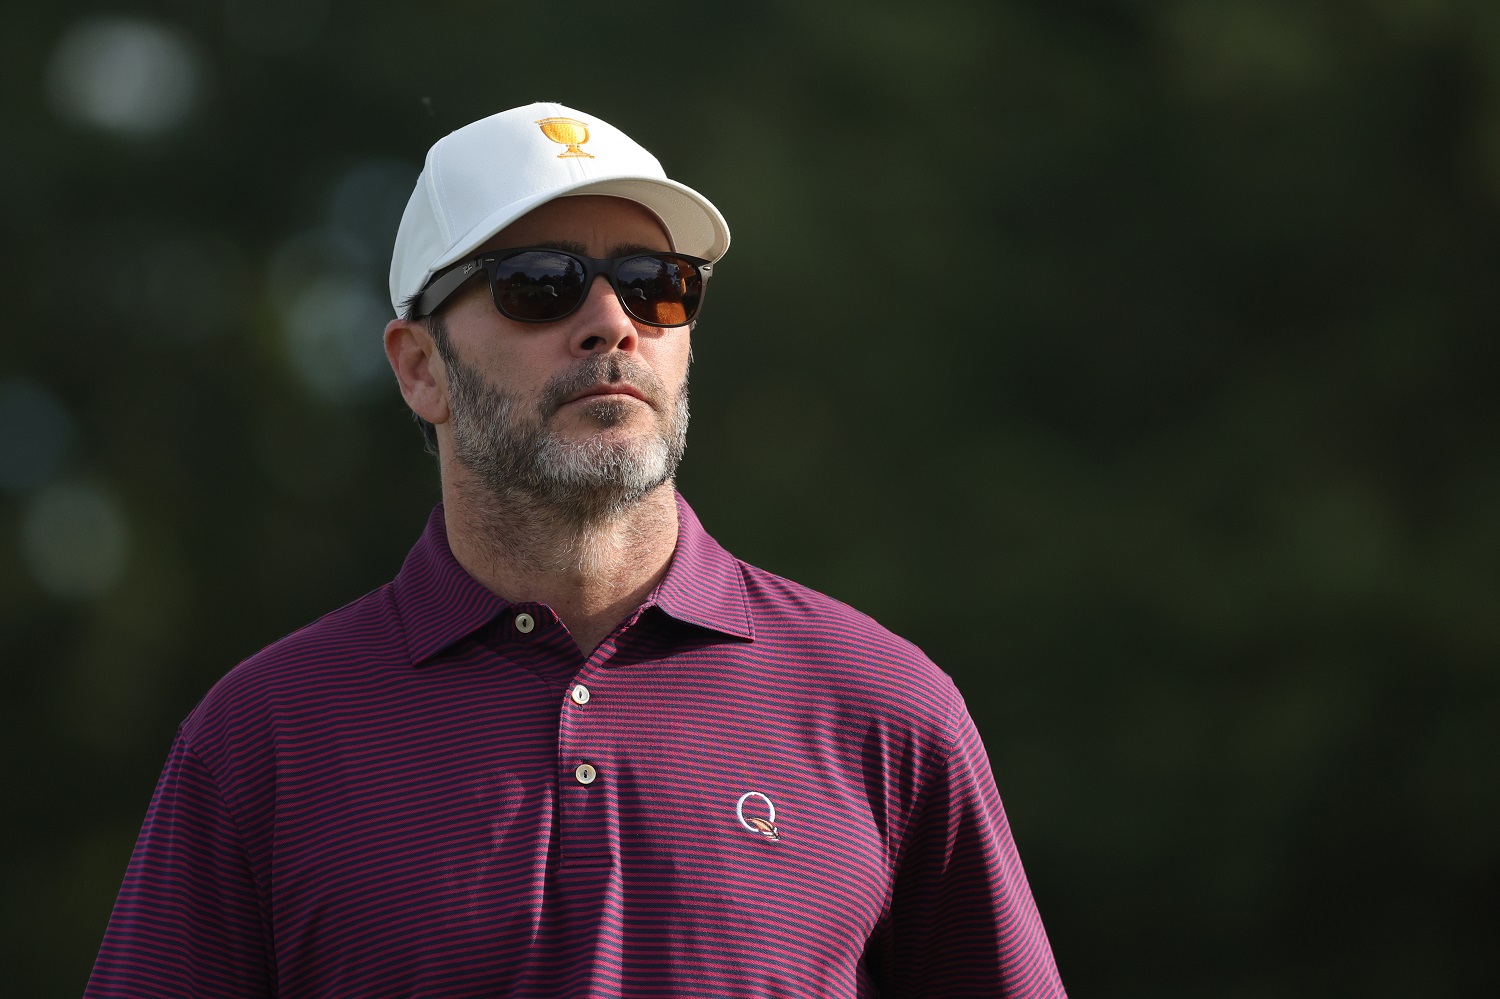 Jimmie Johnson looks on during Saturday morning foursomes on Day 3 of the 2022 Presidents Cup at Quail Hollow Country Club on Sept. 24, 2022, in Charlotte, North Carolina. | Stacy Revere/Getty Images